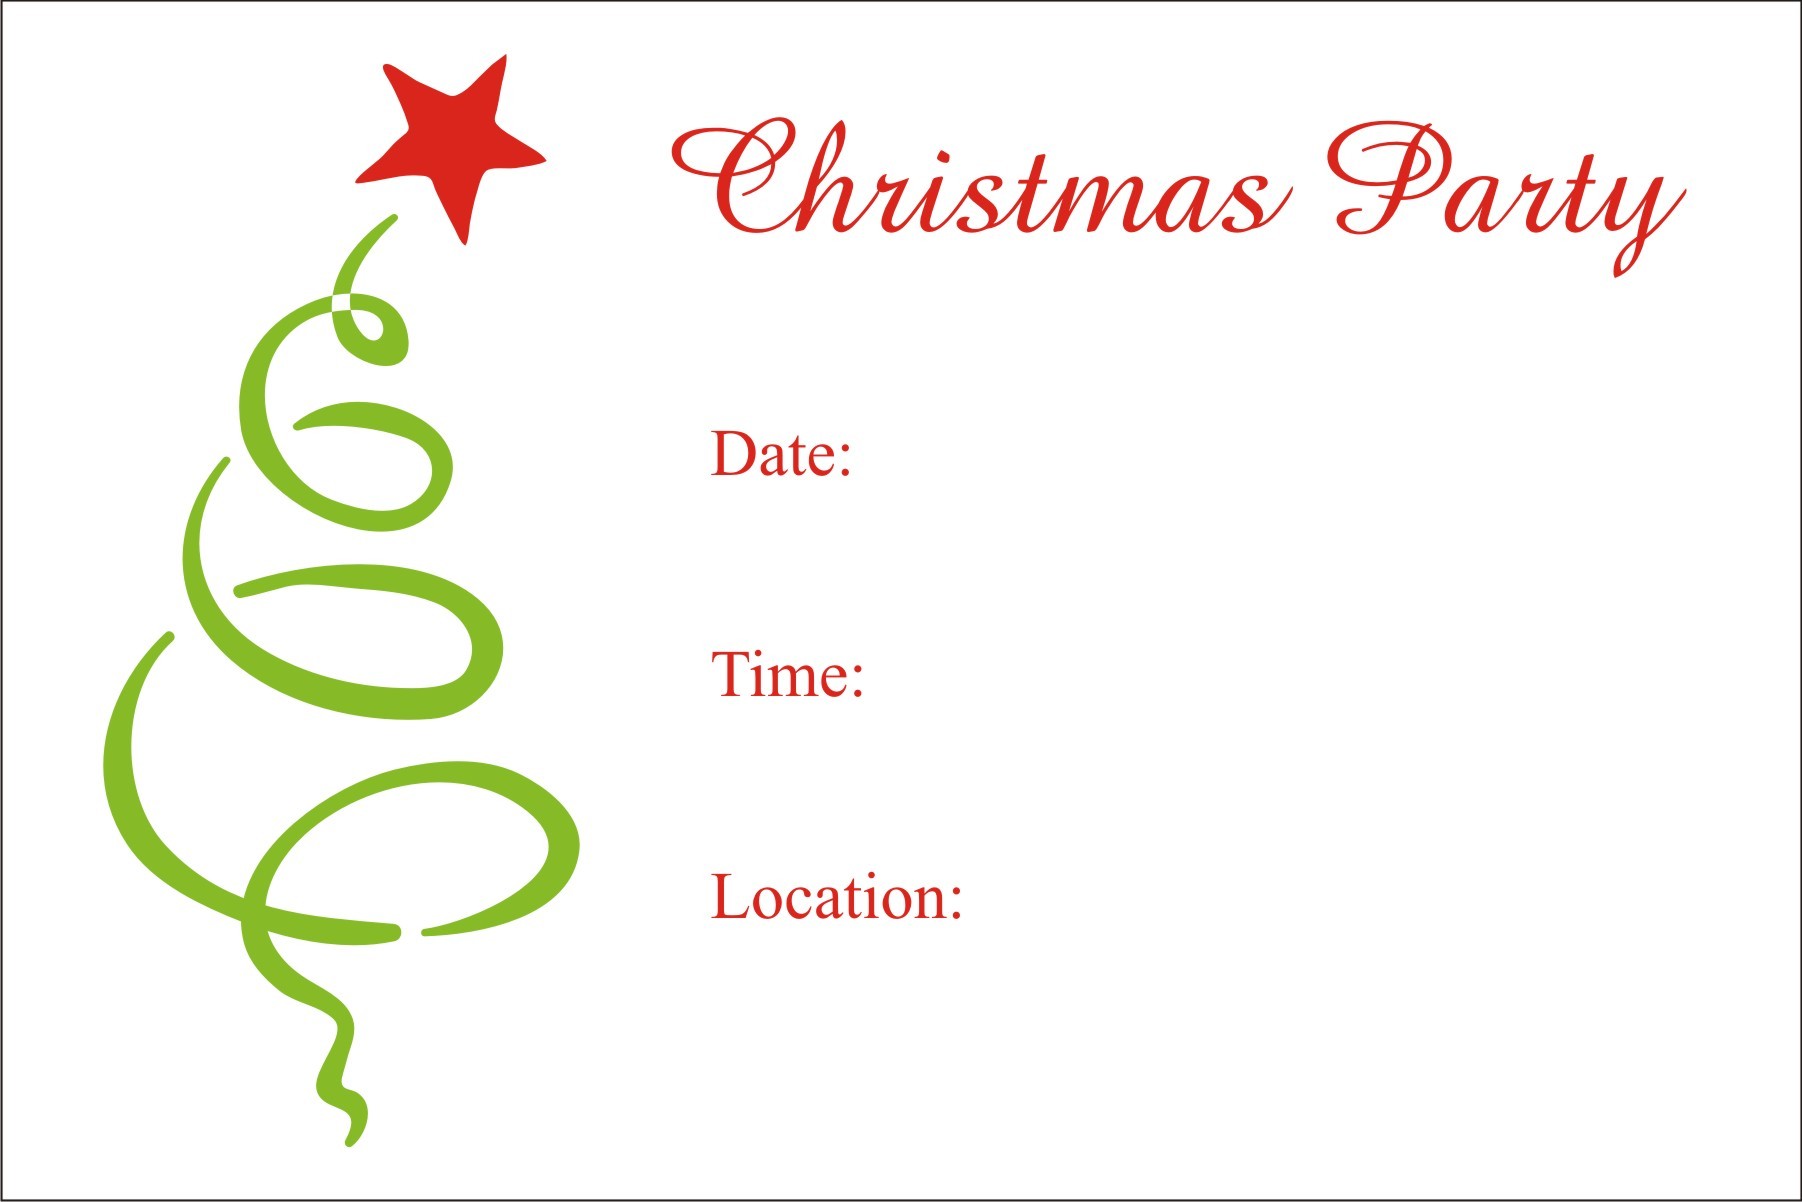 downloadable free holiday party invitation templates word